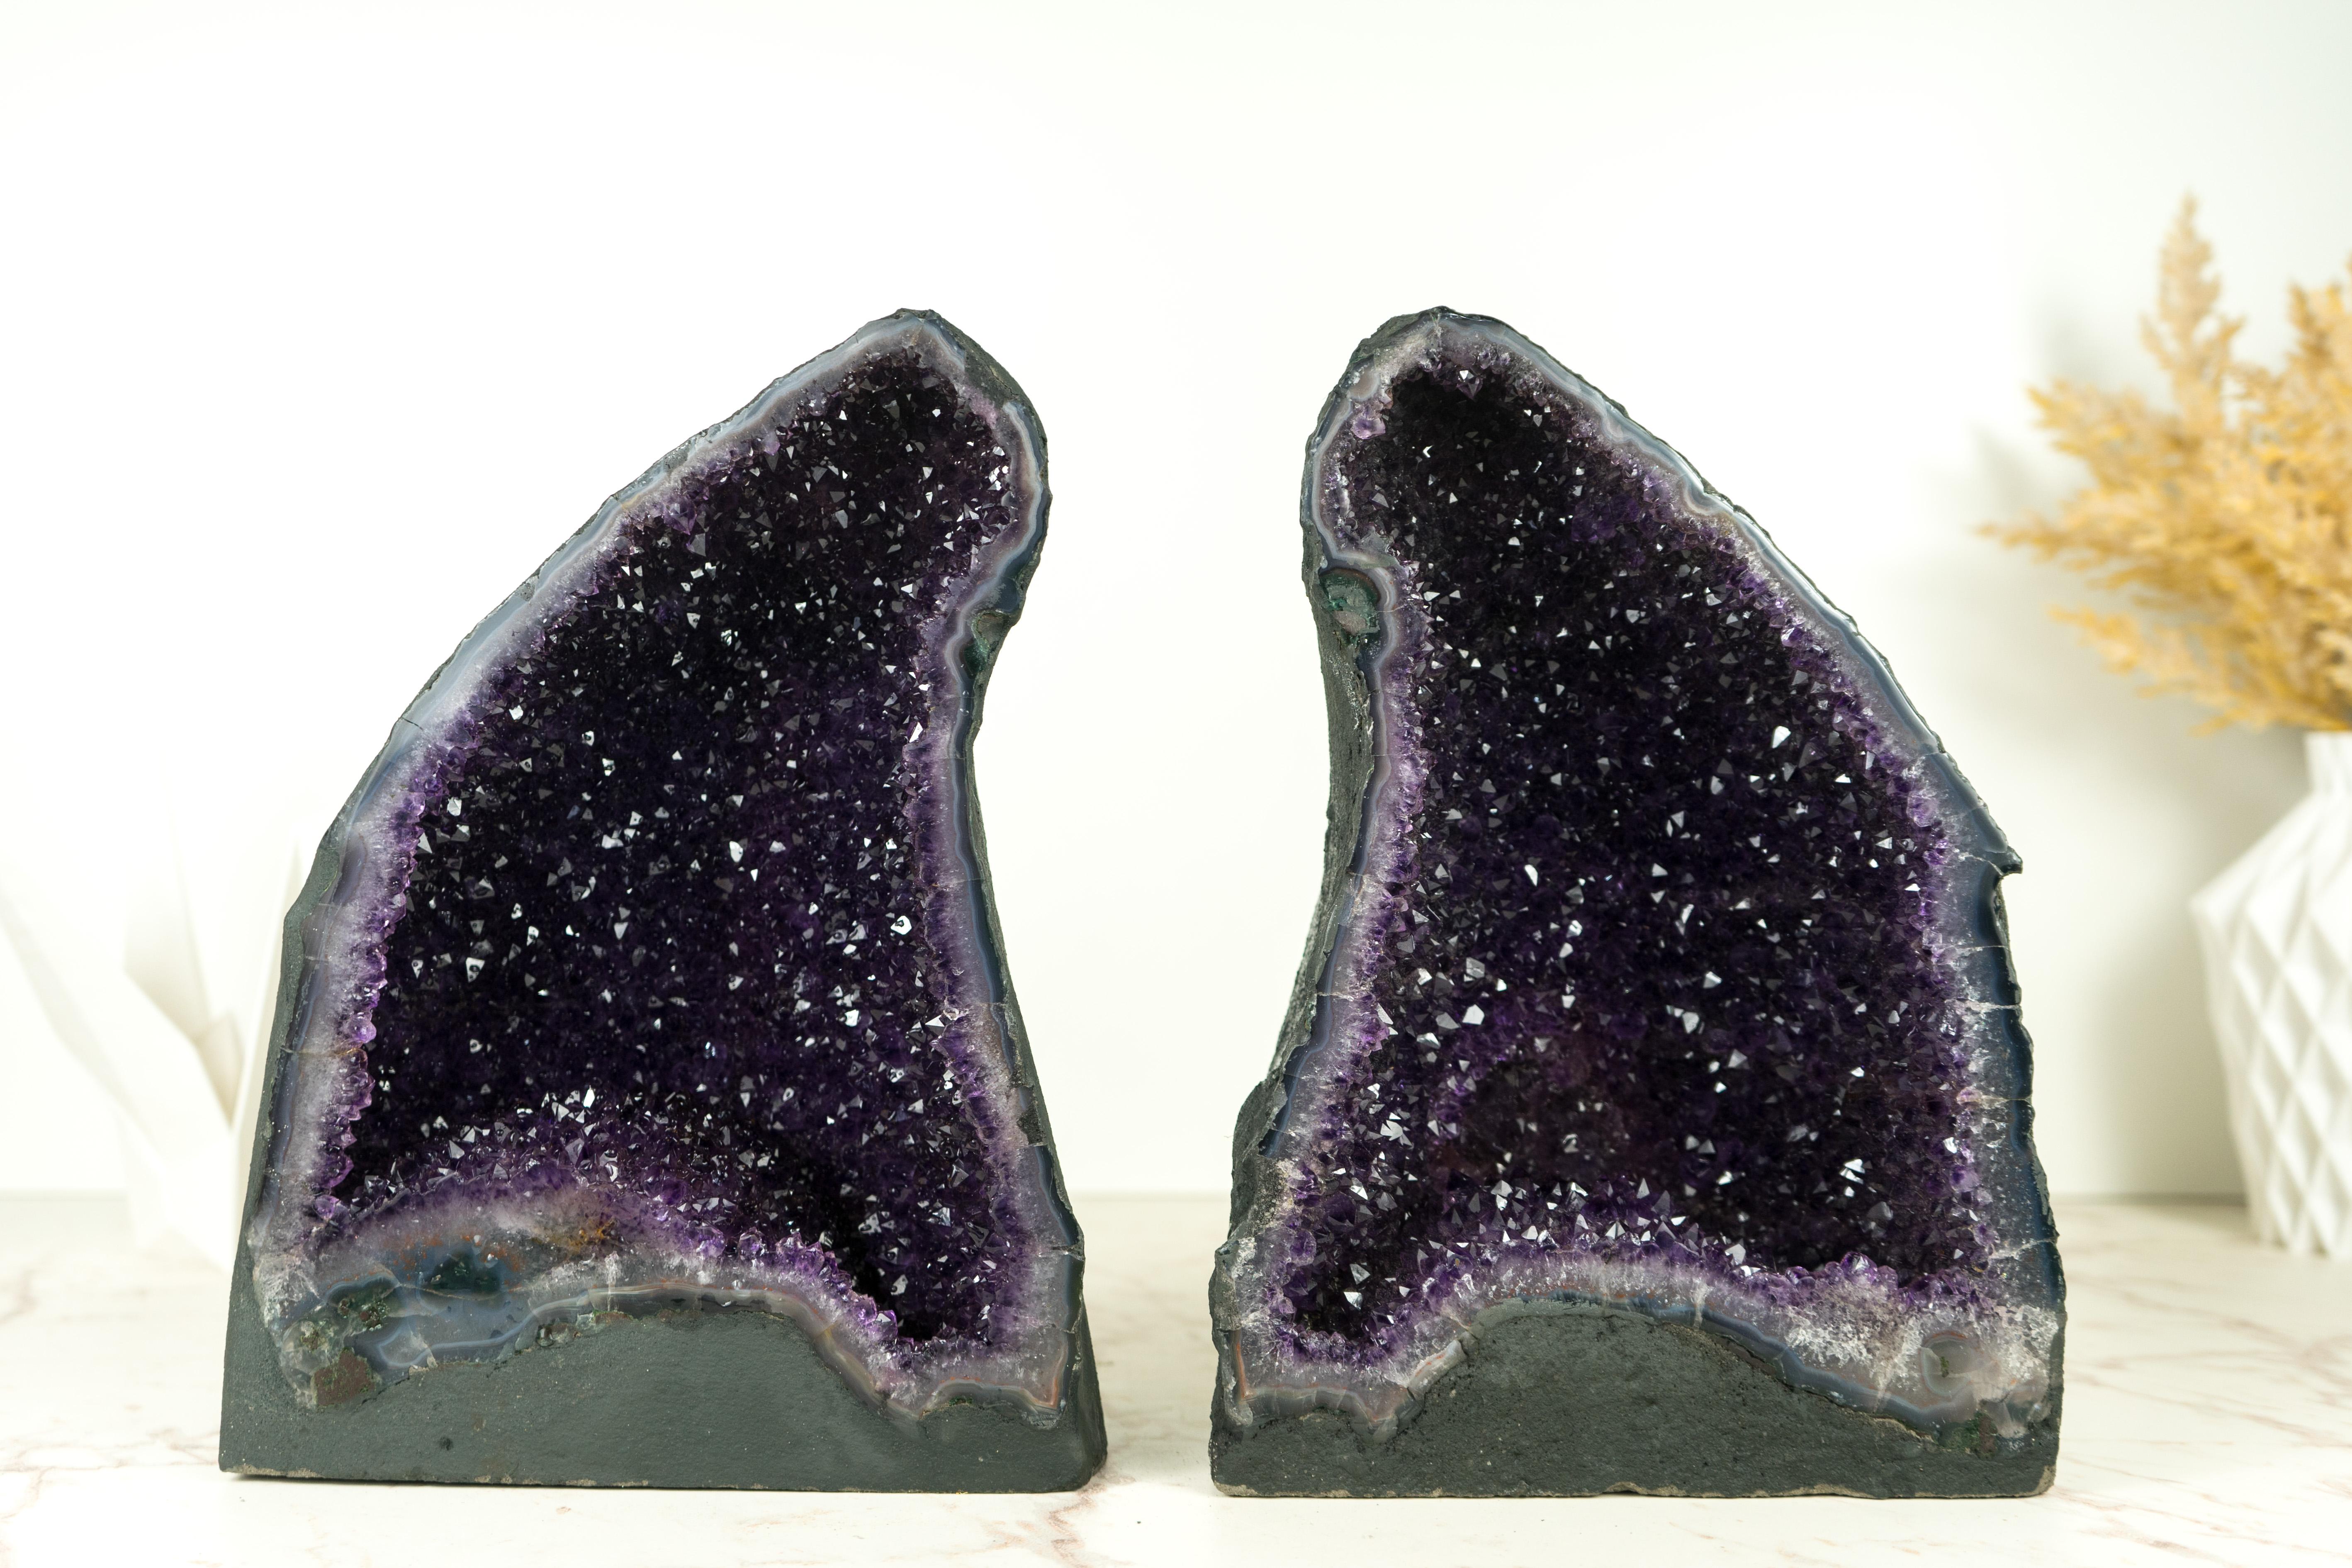 An exquisite pair of Amethyst Geode Caves, these specimens stand as a testament to nature's artistry. Formed over millions of years, this geode boasts unique and rare characteristics, including the sparkling galaxy Amethyst, a deep natural purple